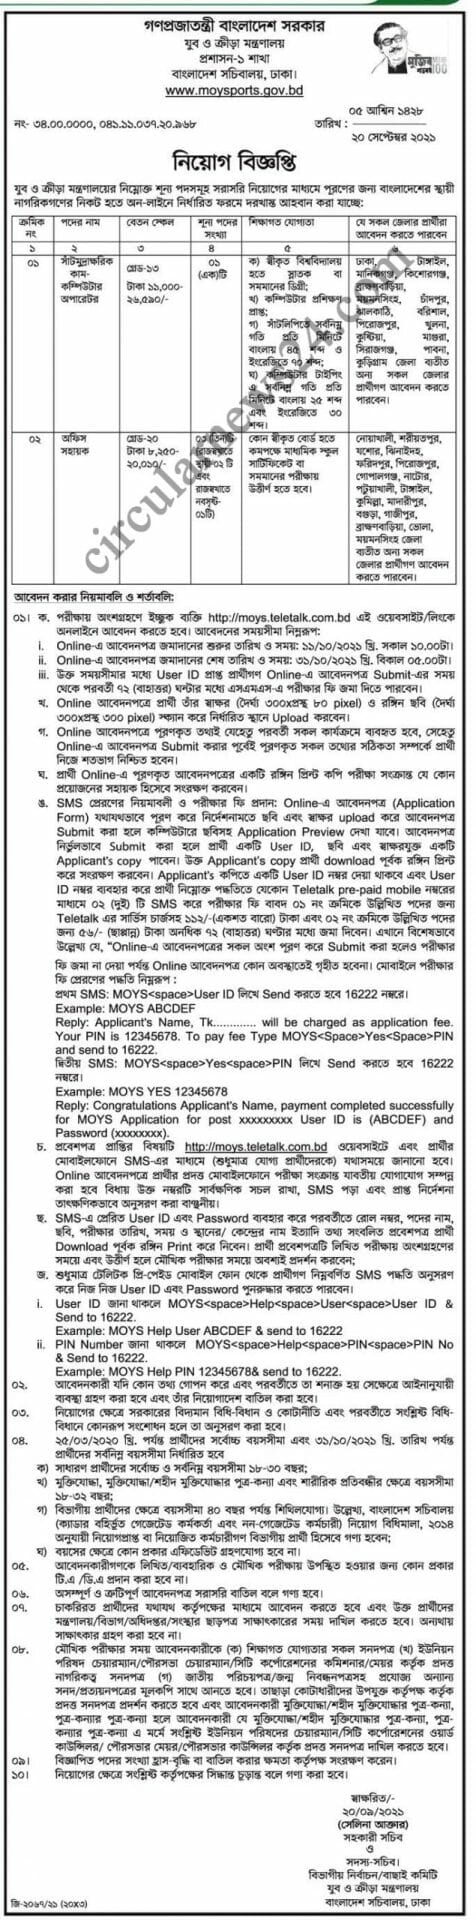 Ministry of youth and sports job circular 2021